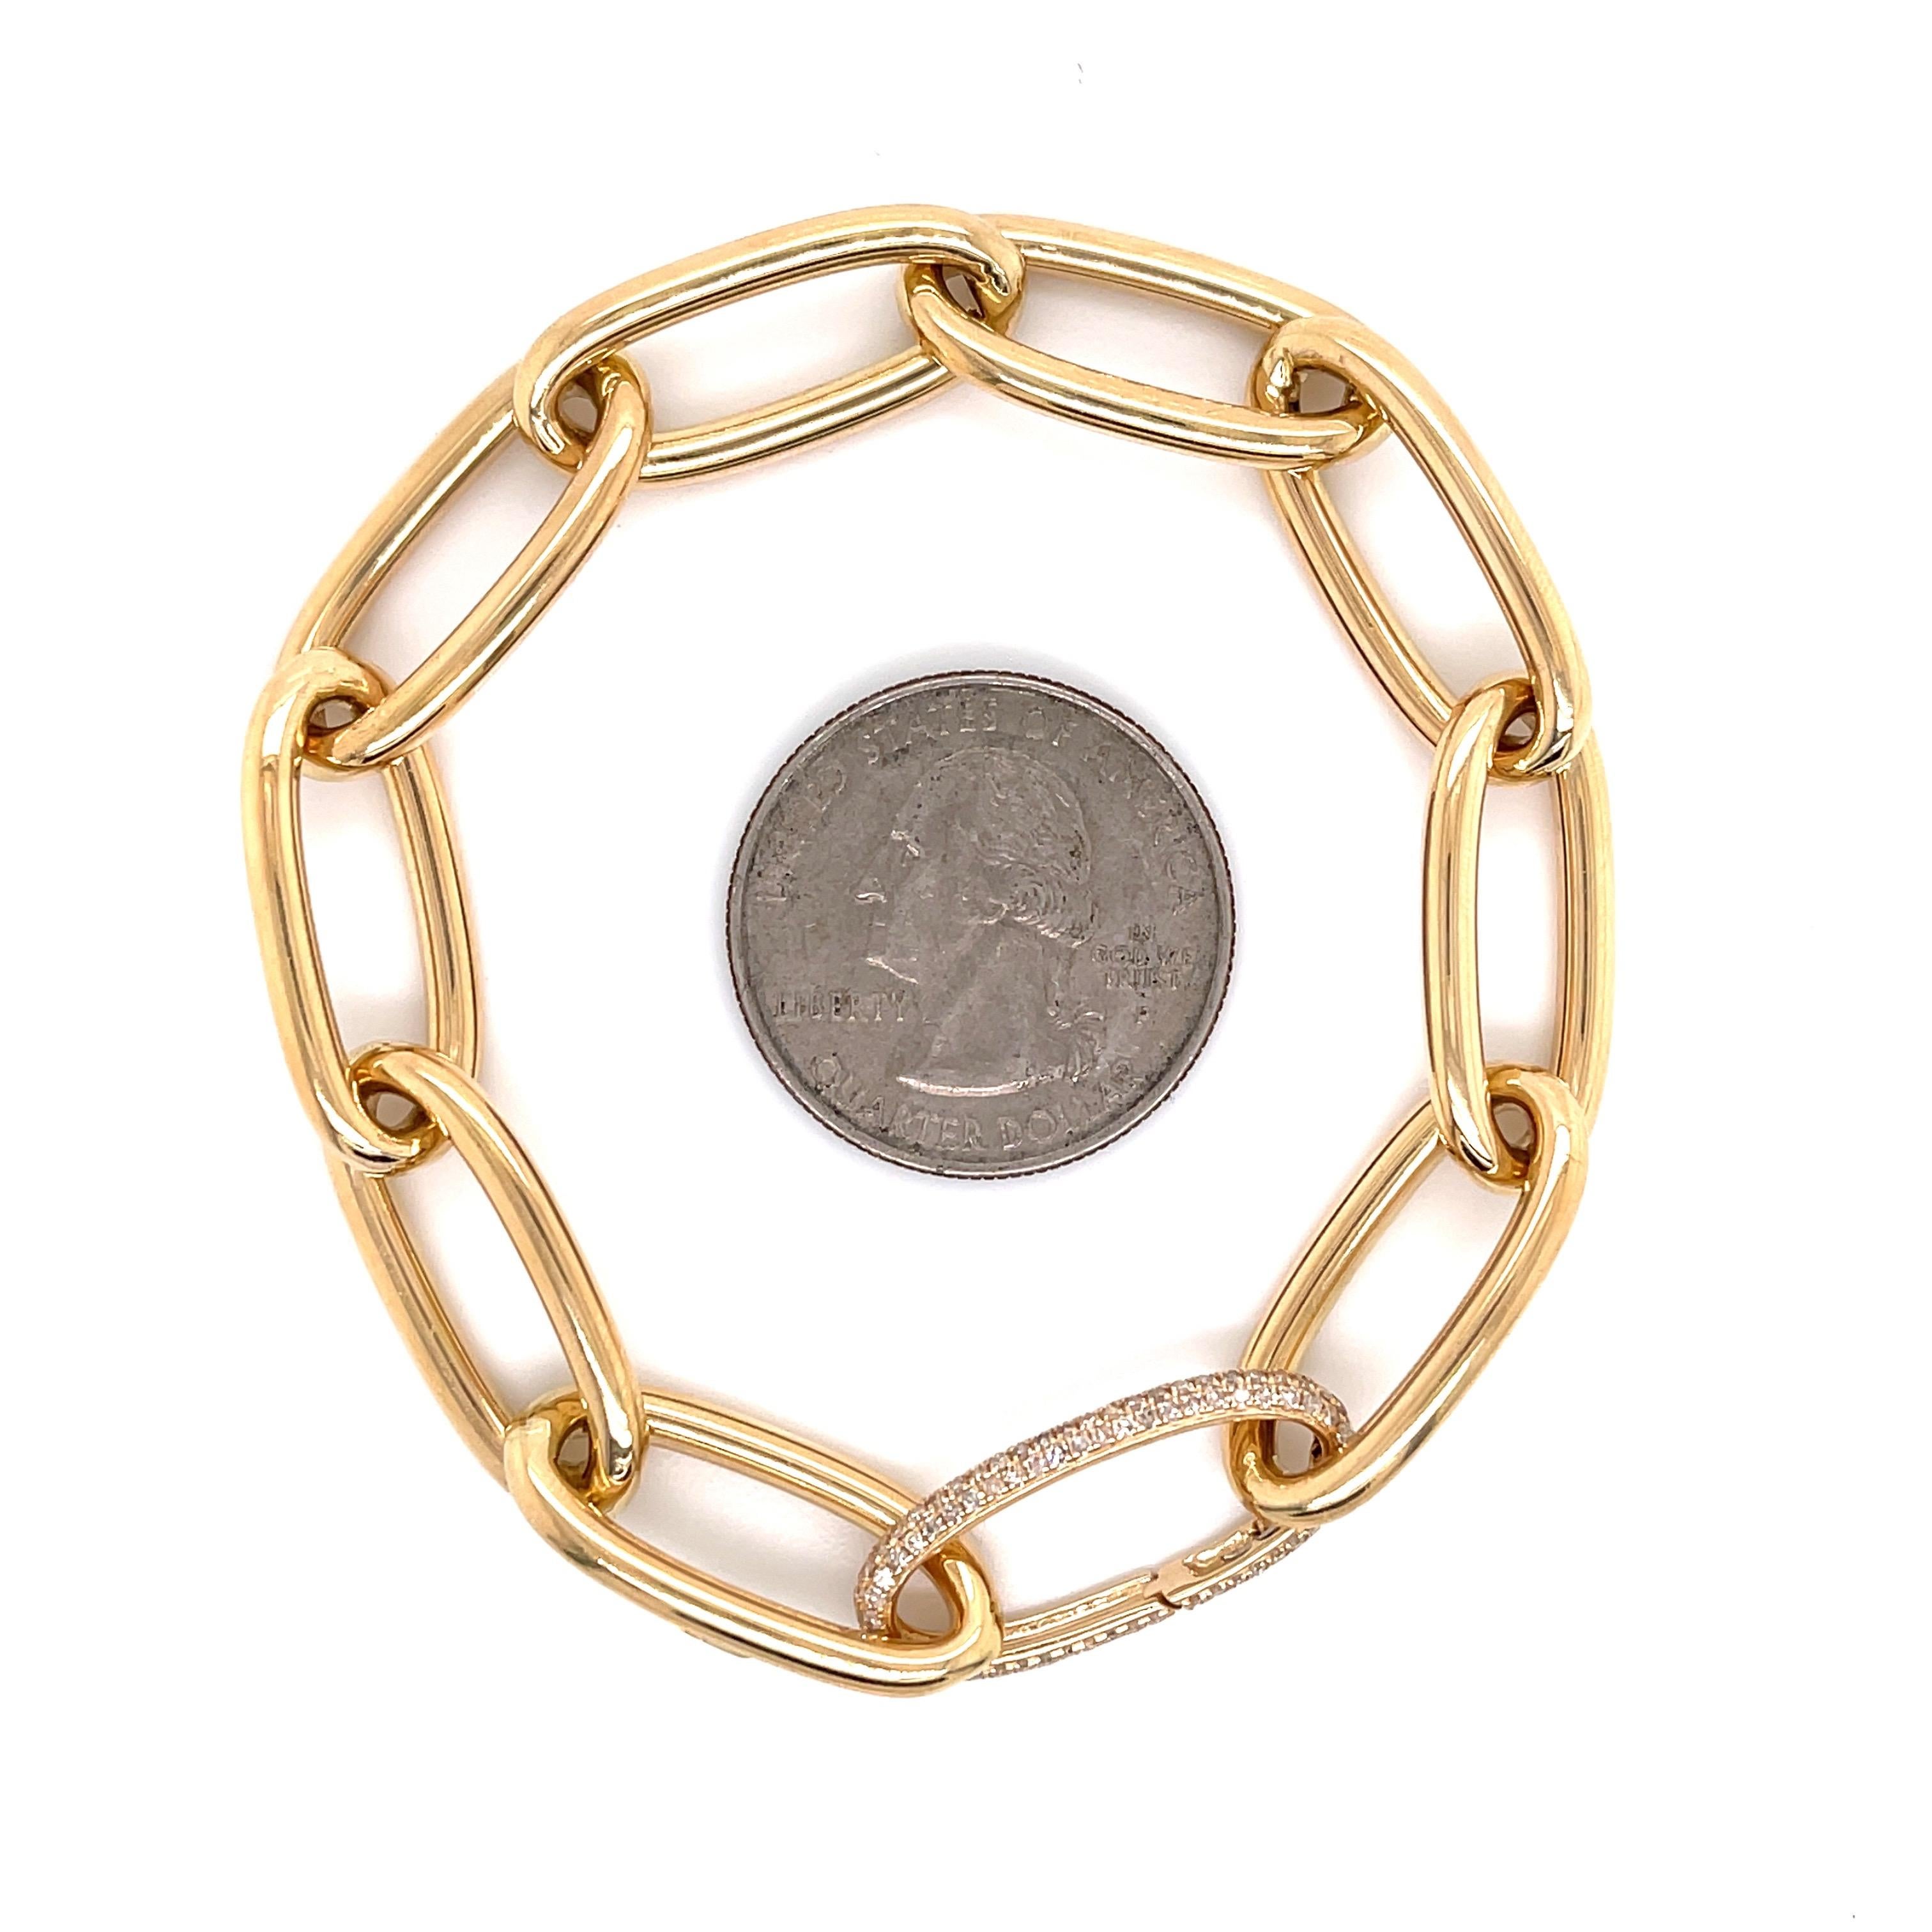 Beautiful Italian bracelet 
Oval shaped links 
Each link 7/8 of an inch and 3/8 of an inch wide
total weight 10.5 g. 